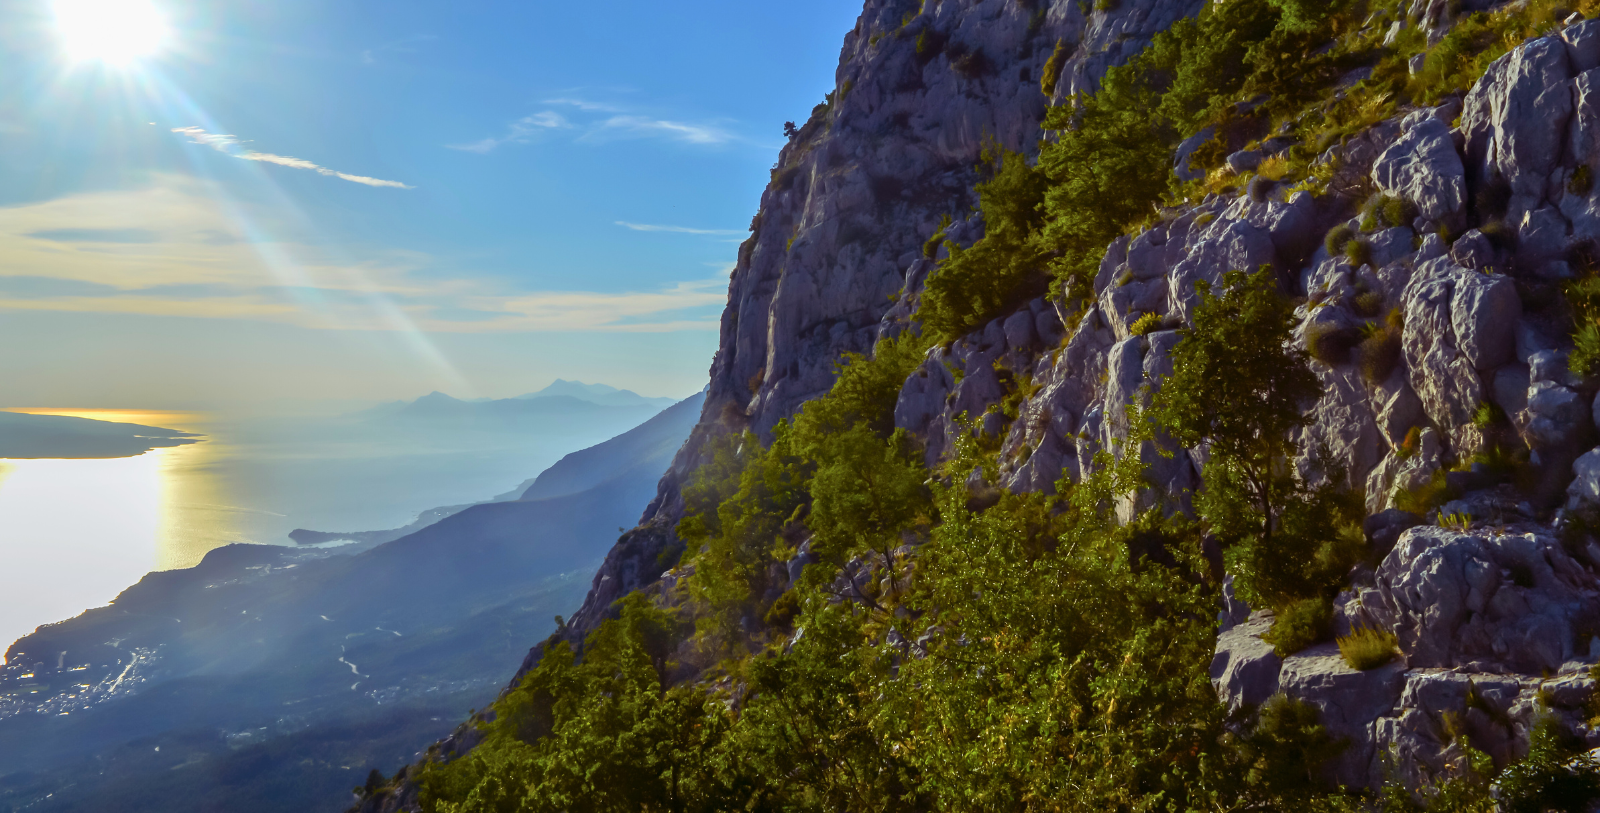 Explore the wild beauty of Biokovo Nature Park, a haven for hikers with breathtaking views of the Makarska Riviera and the surrounding mountains.